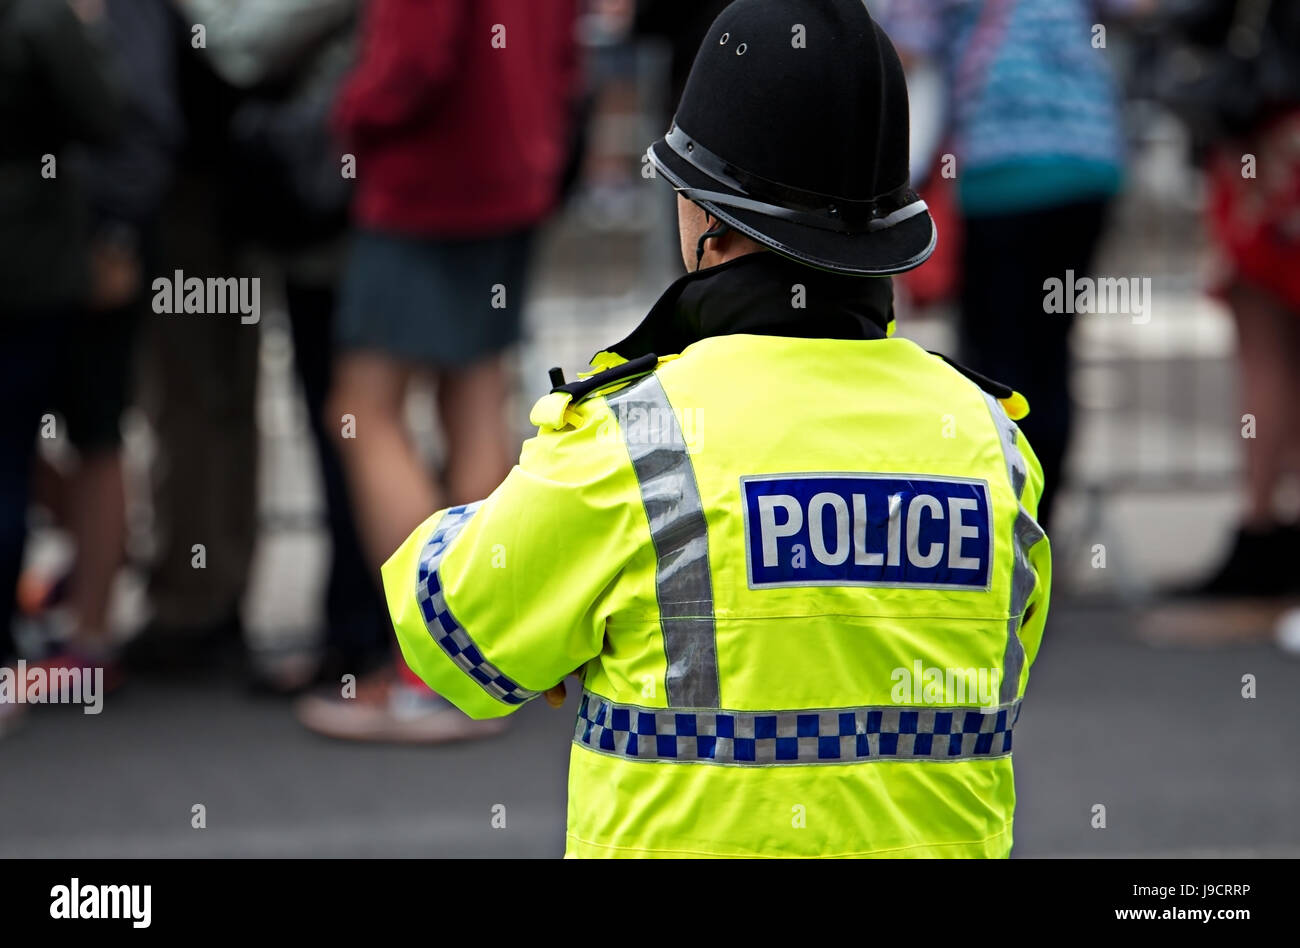 British Police Officer in high visibility uniform on crowd control Stock Photo